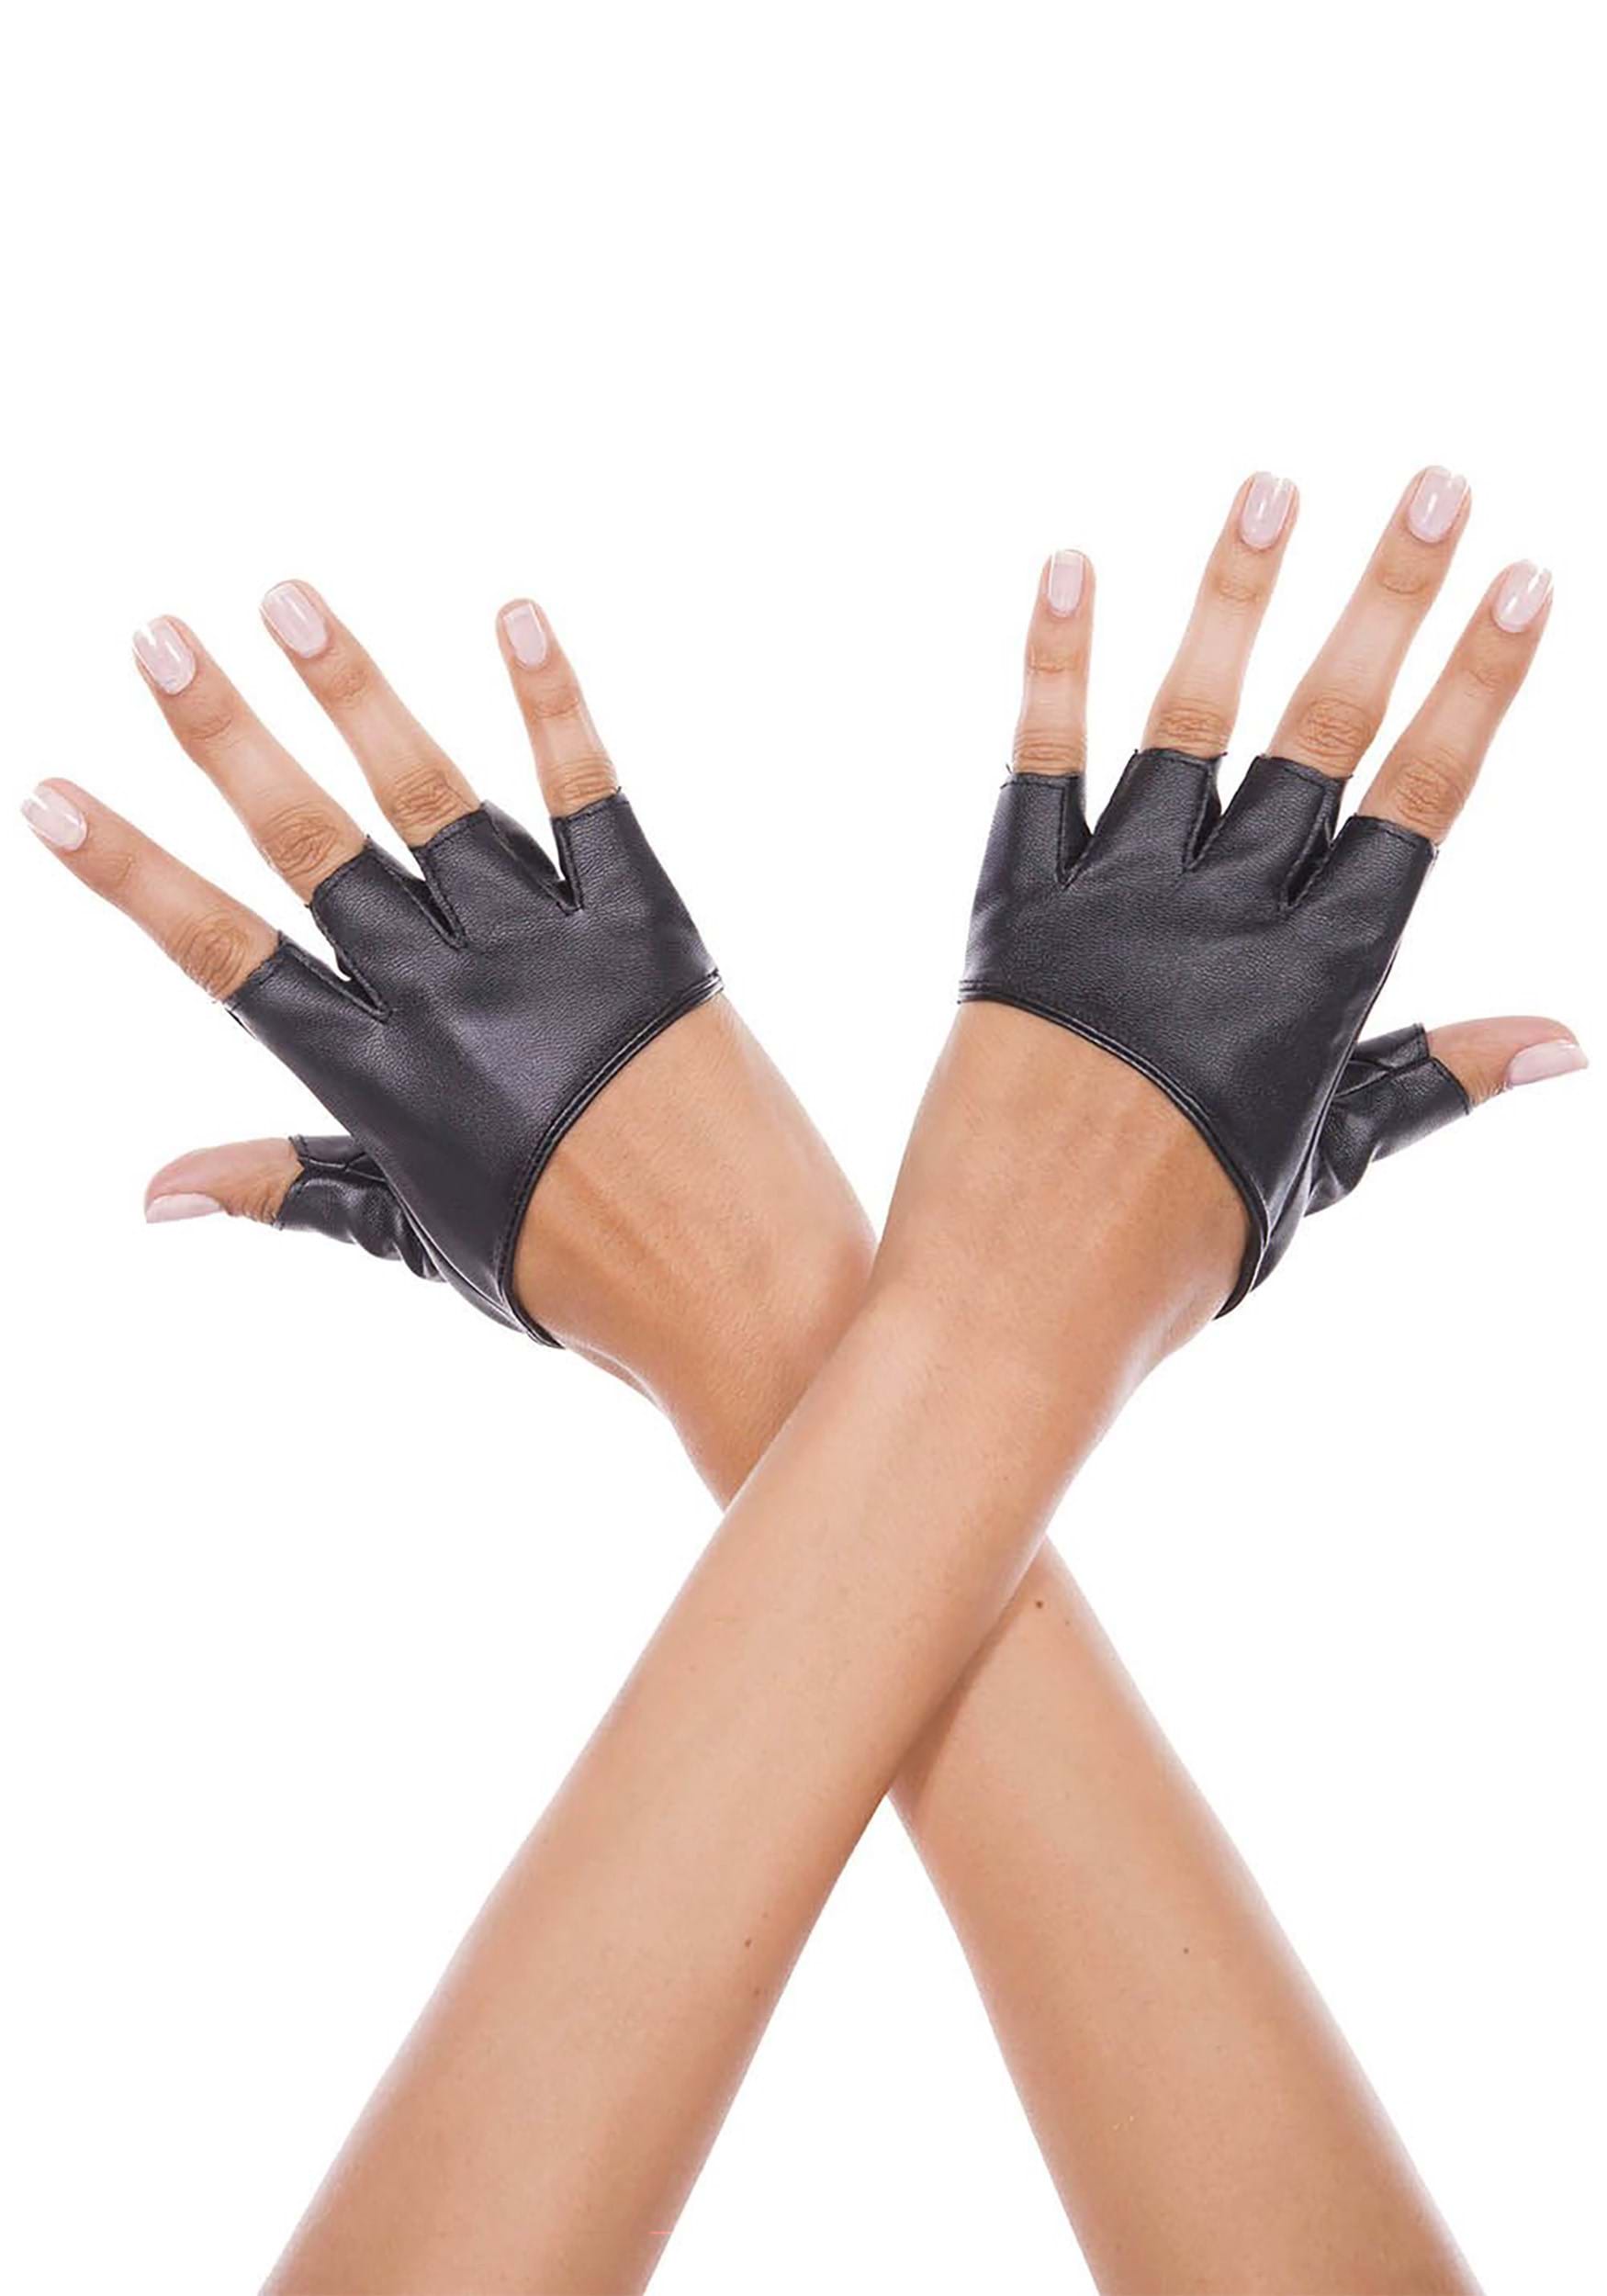 https://images.halloweencostumes.ca/products/93496/1-1/womens-short-faux-leather-fingerless-gloves.jpg